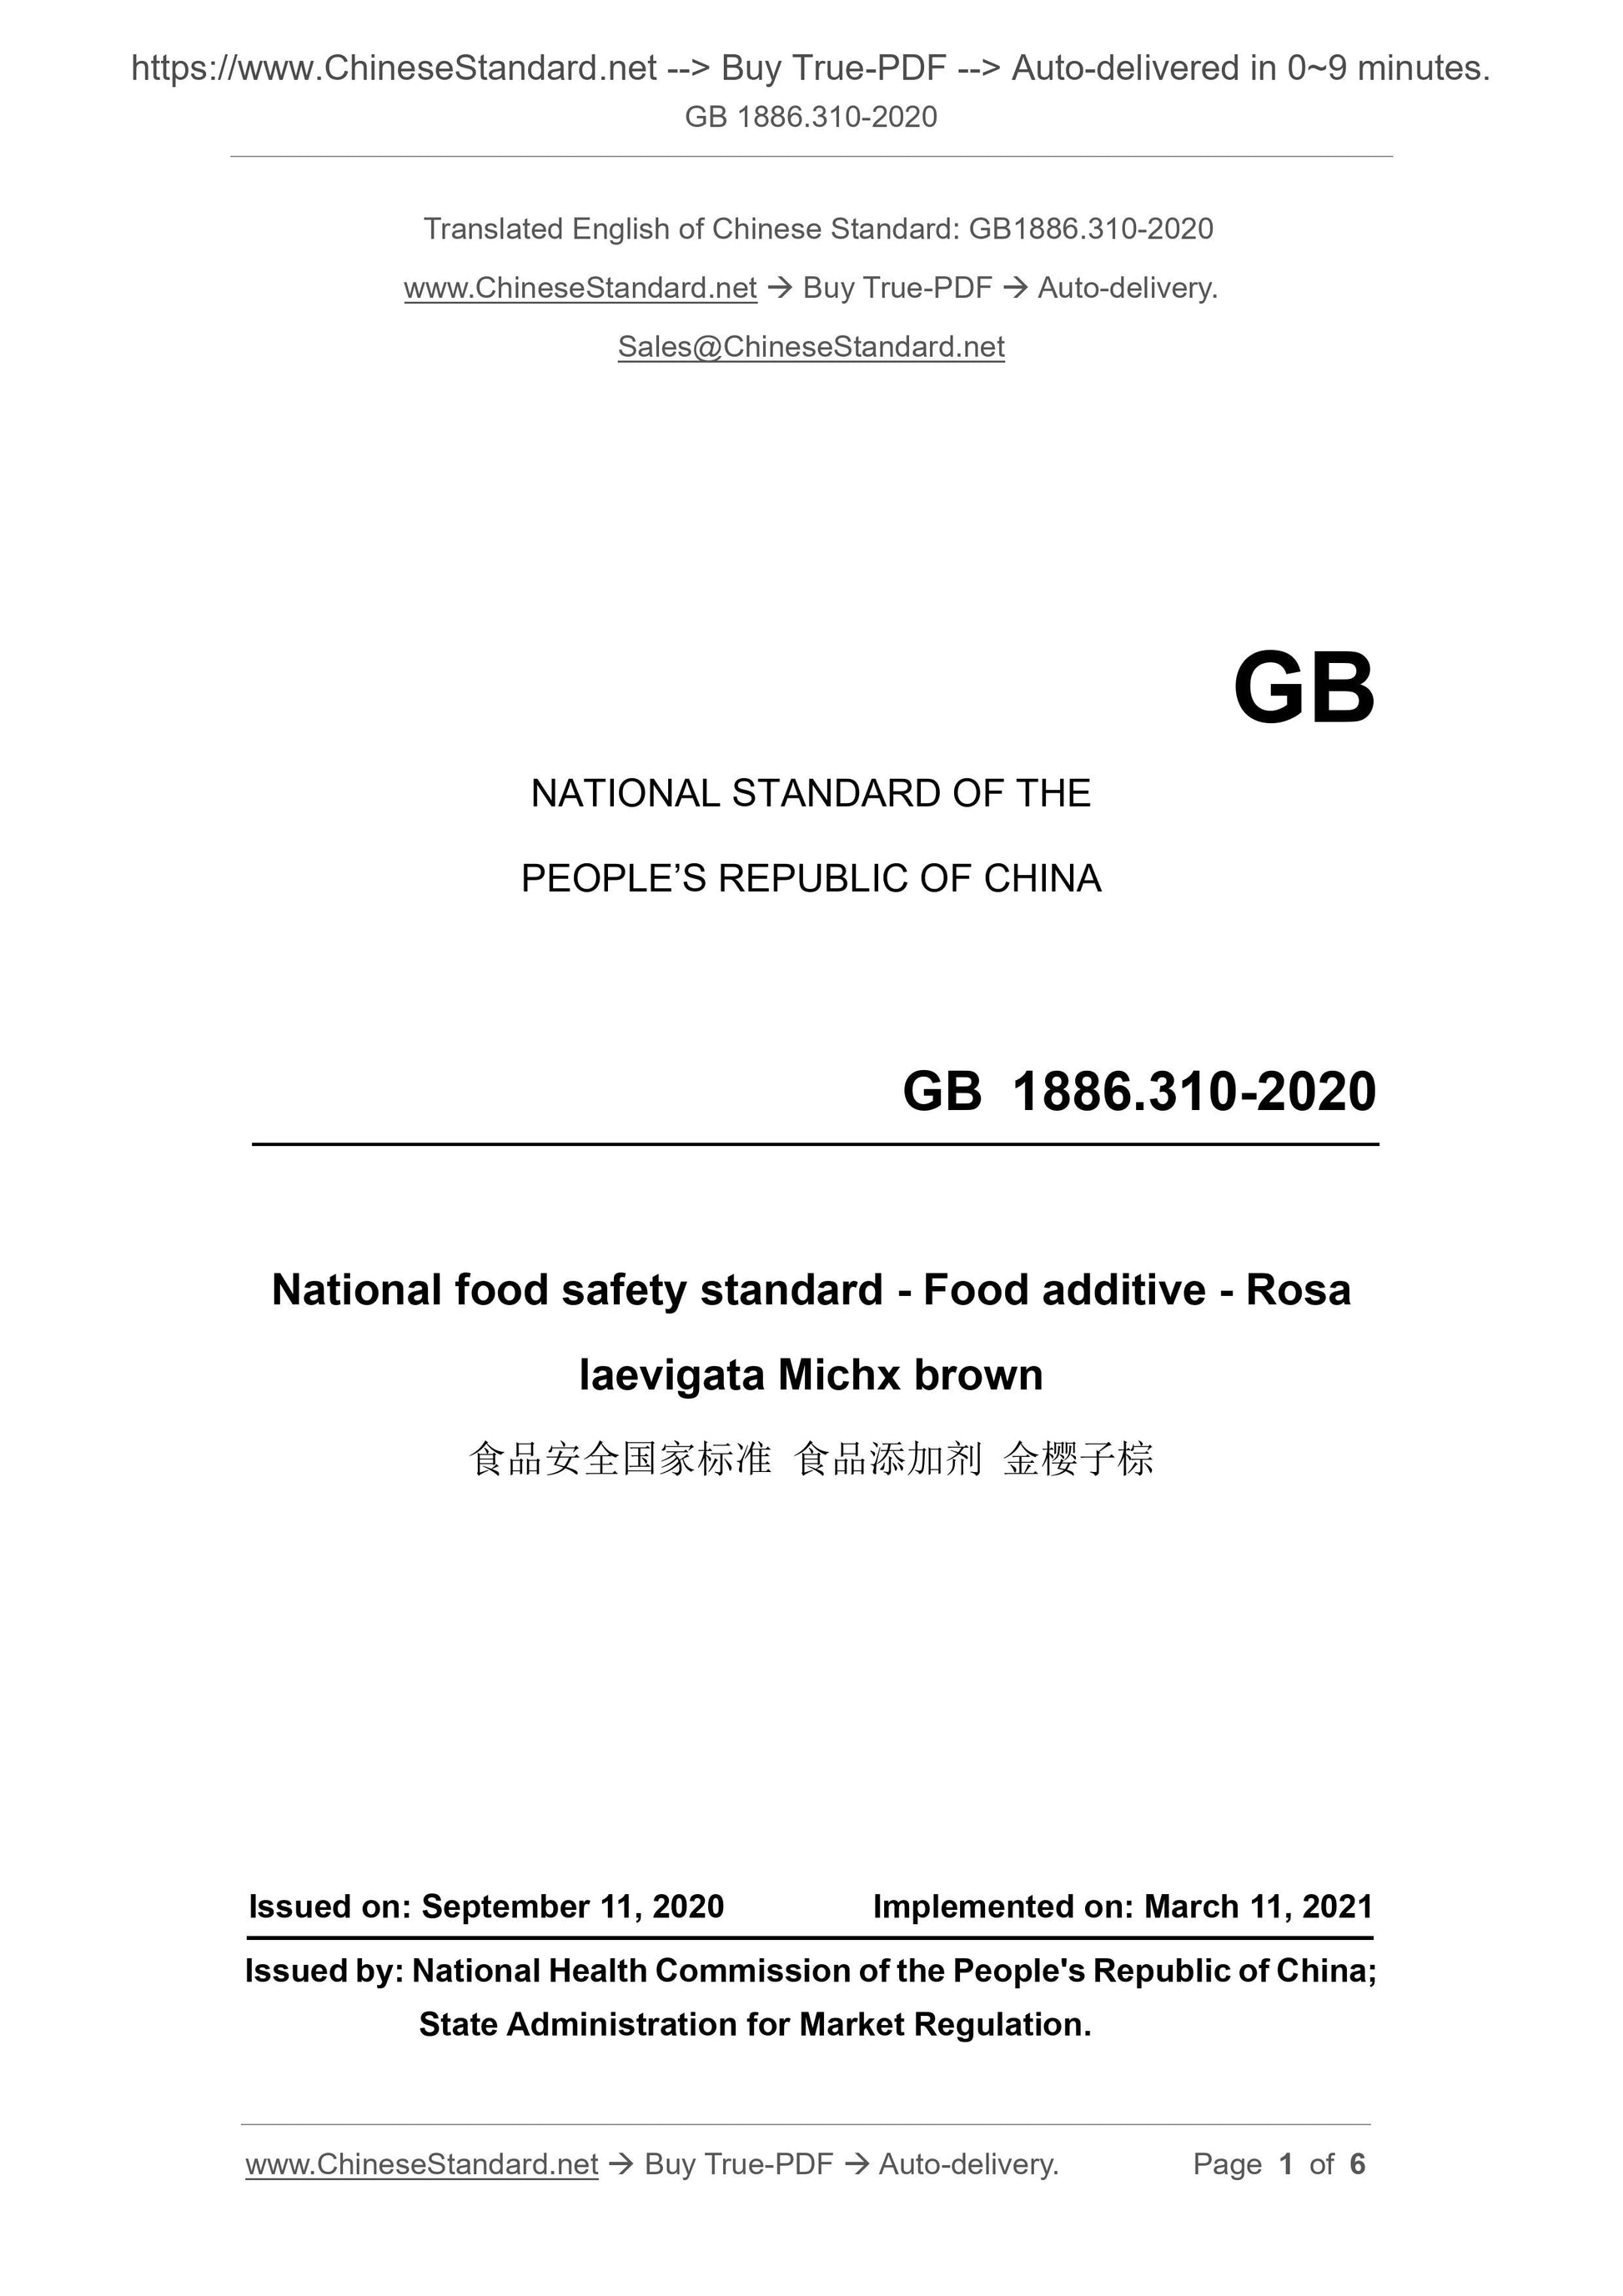 GB 1886.310-2020 Page 1